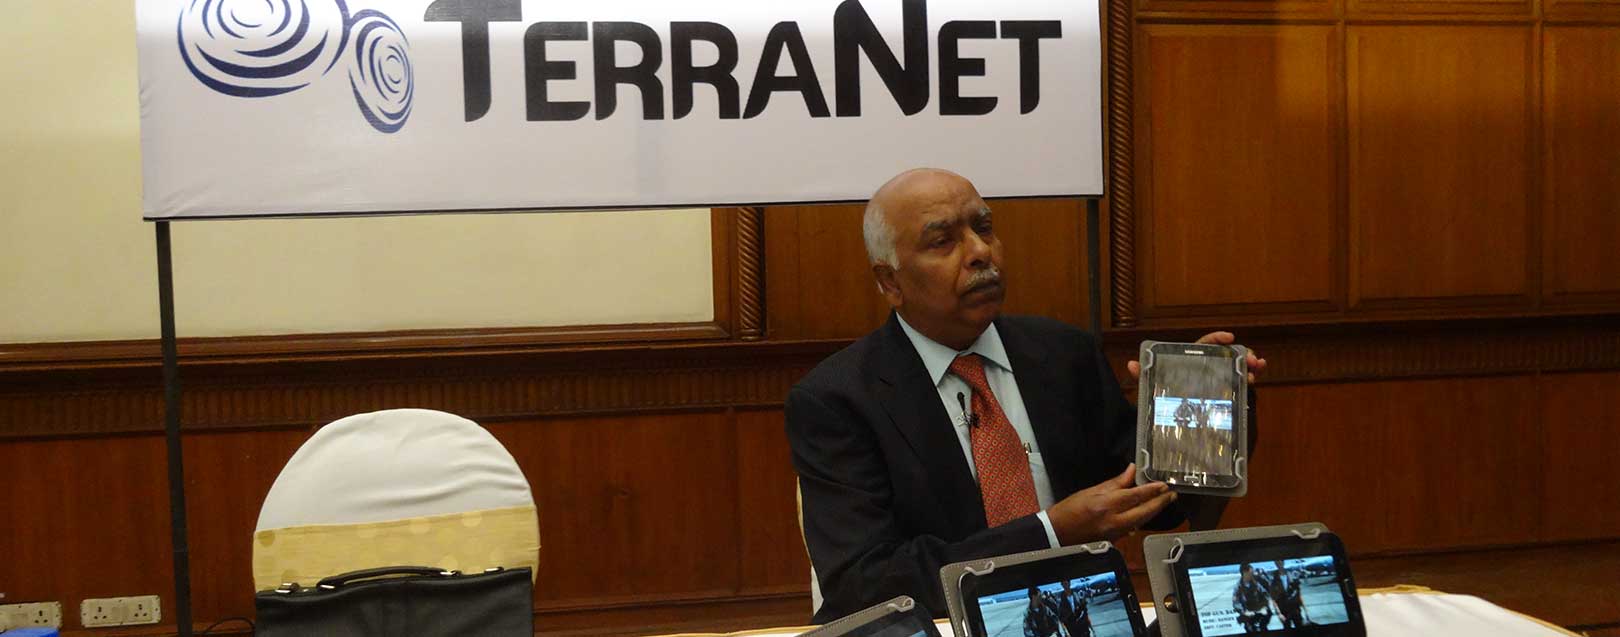 TerraNet targets India to market new tethering app